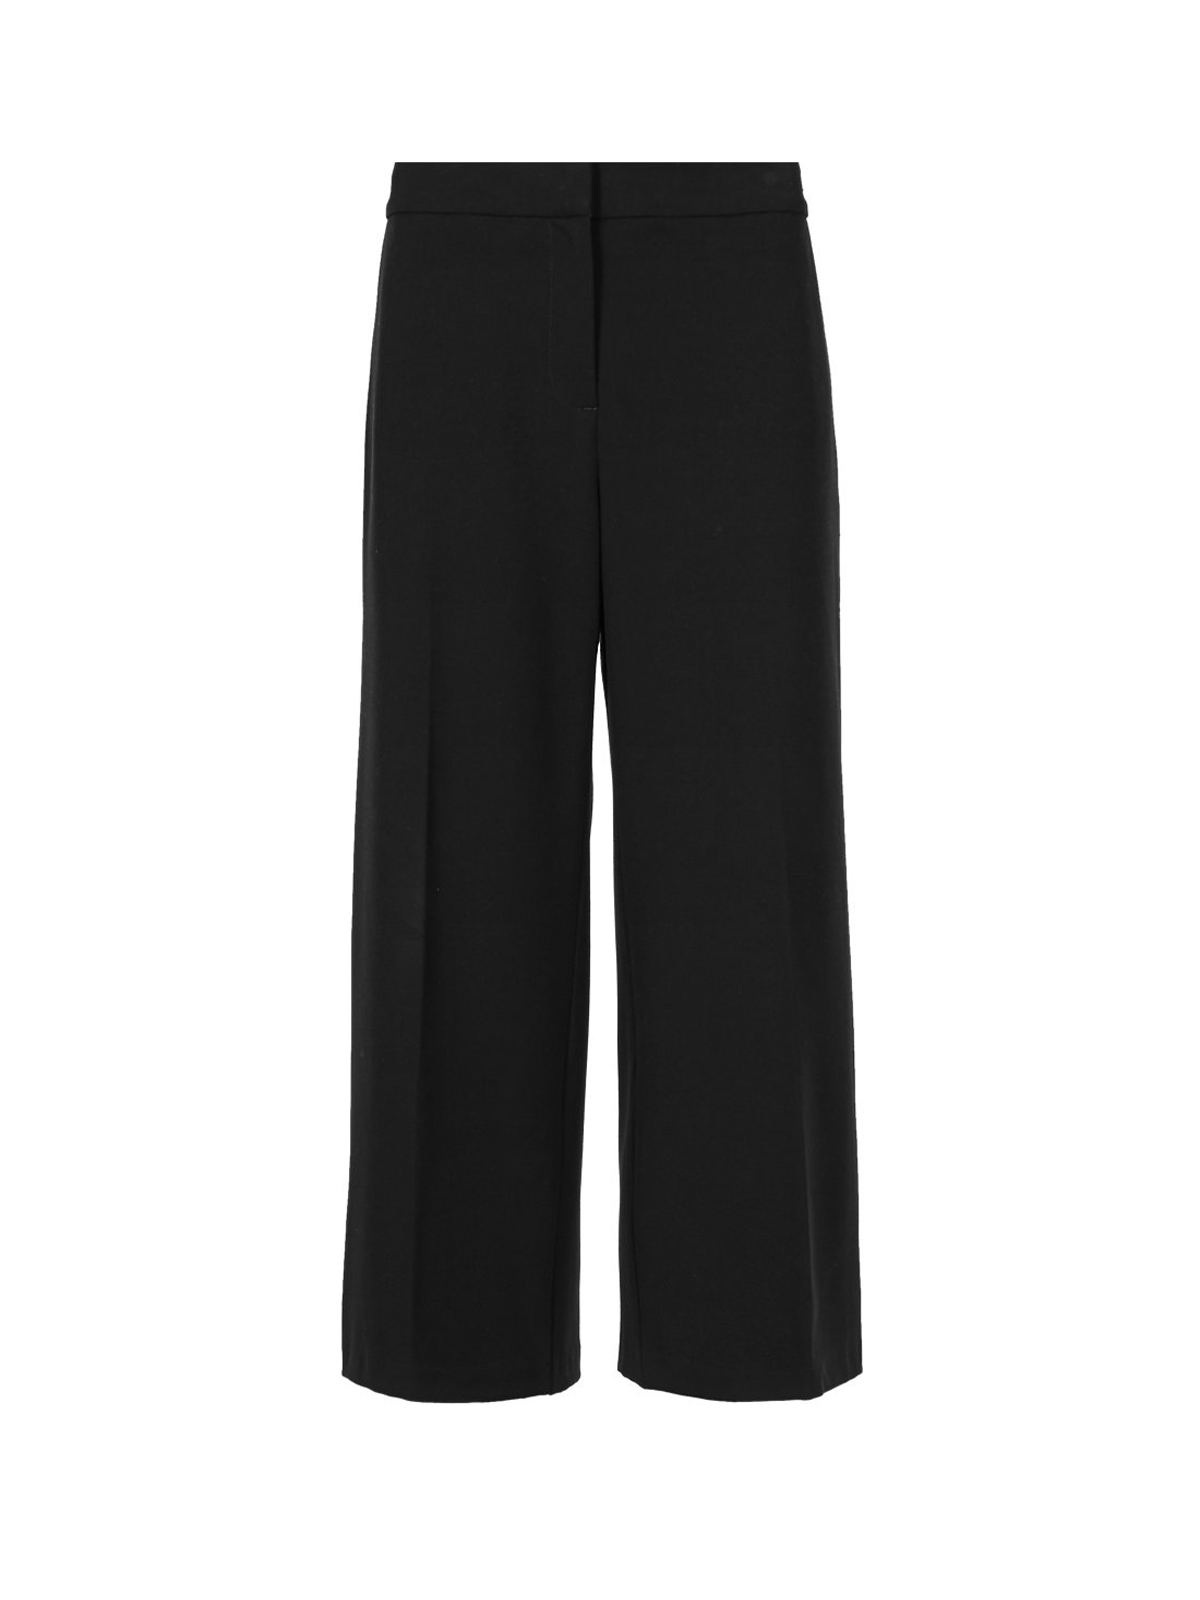 Marks and Spencer - - M&5 ASSORTED Ladies Trousers - Size 12 to 18